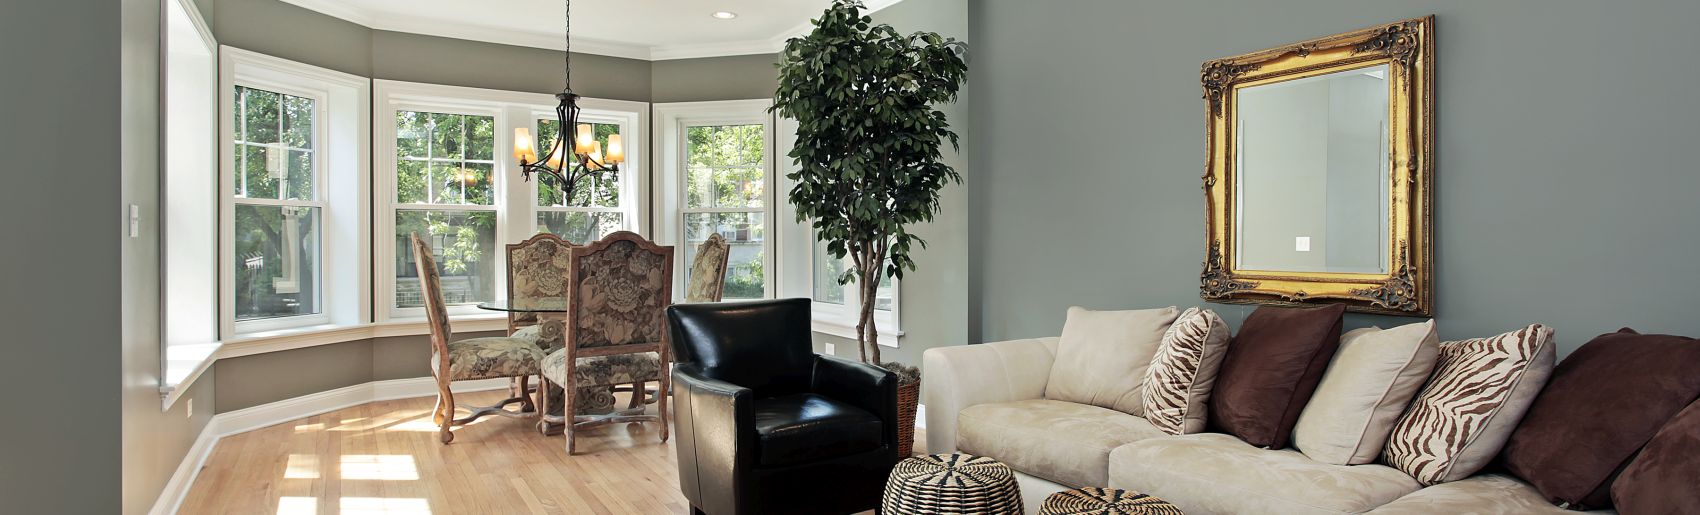 How to Prepare for Residential Interior Painting